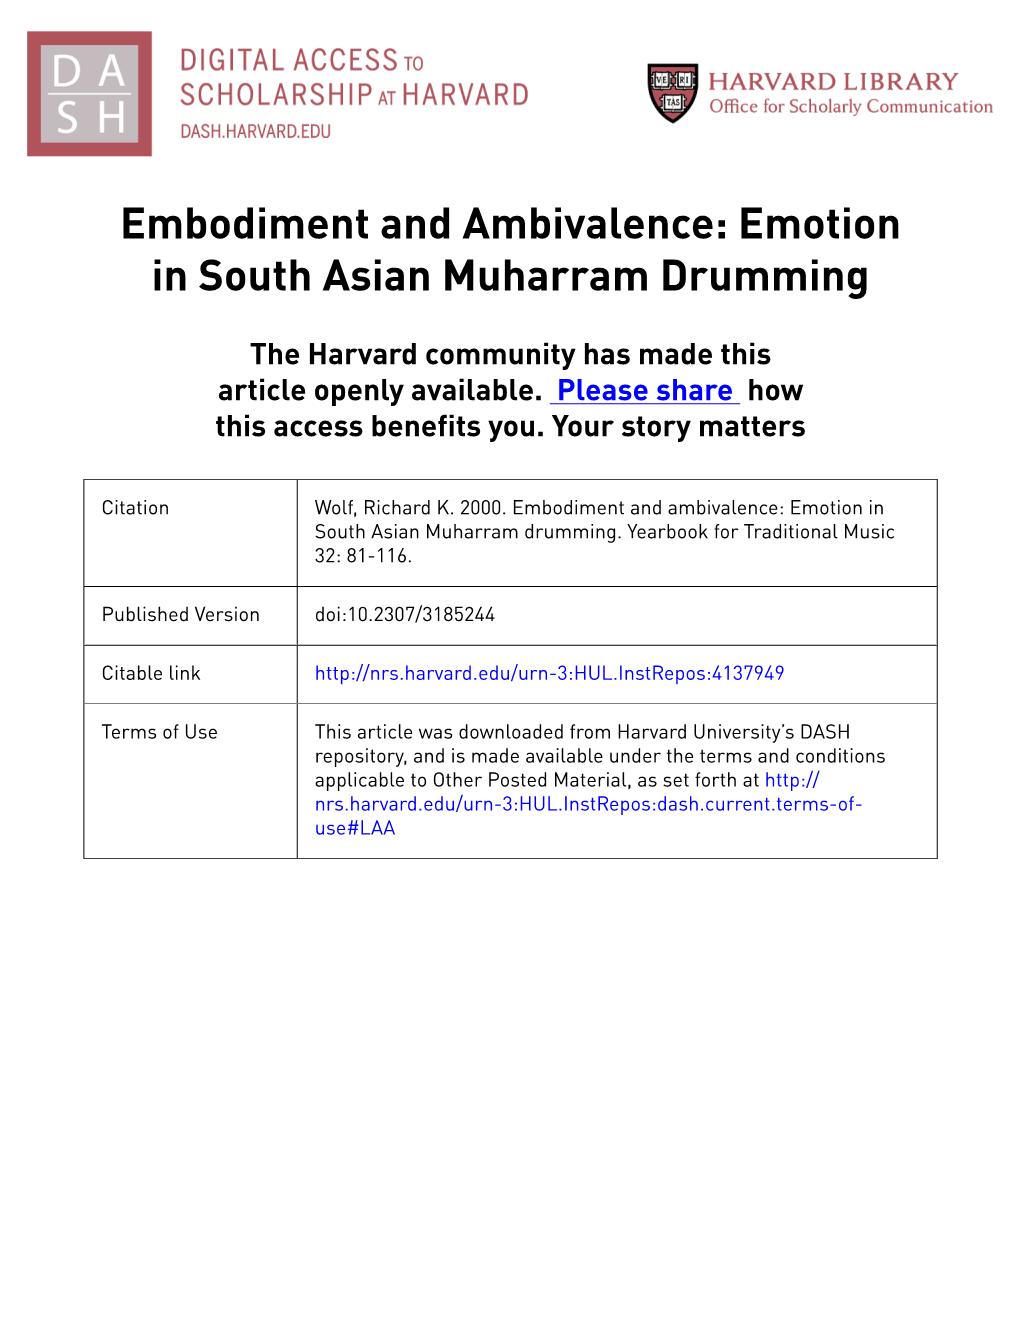 Embodiment and Ambivalence: Emotion in South Asian Muharram Drumming